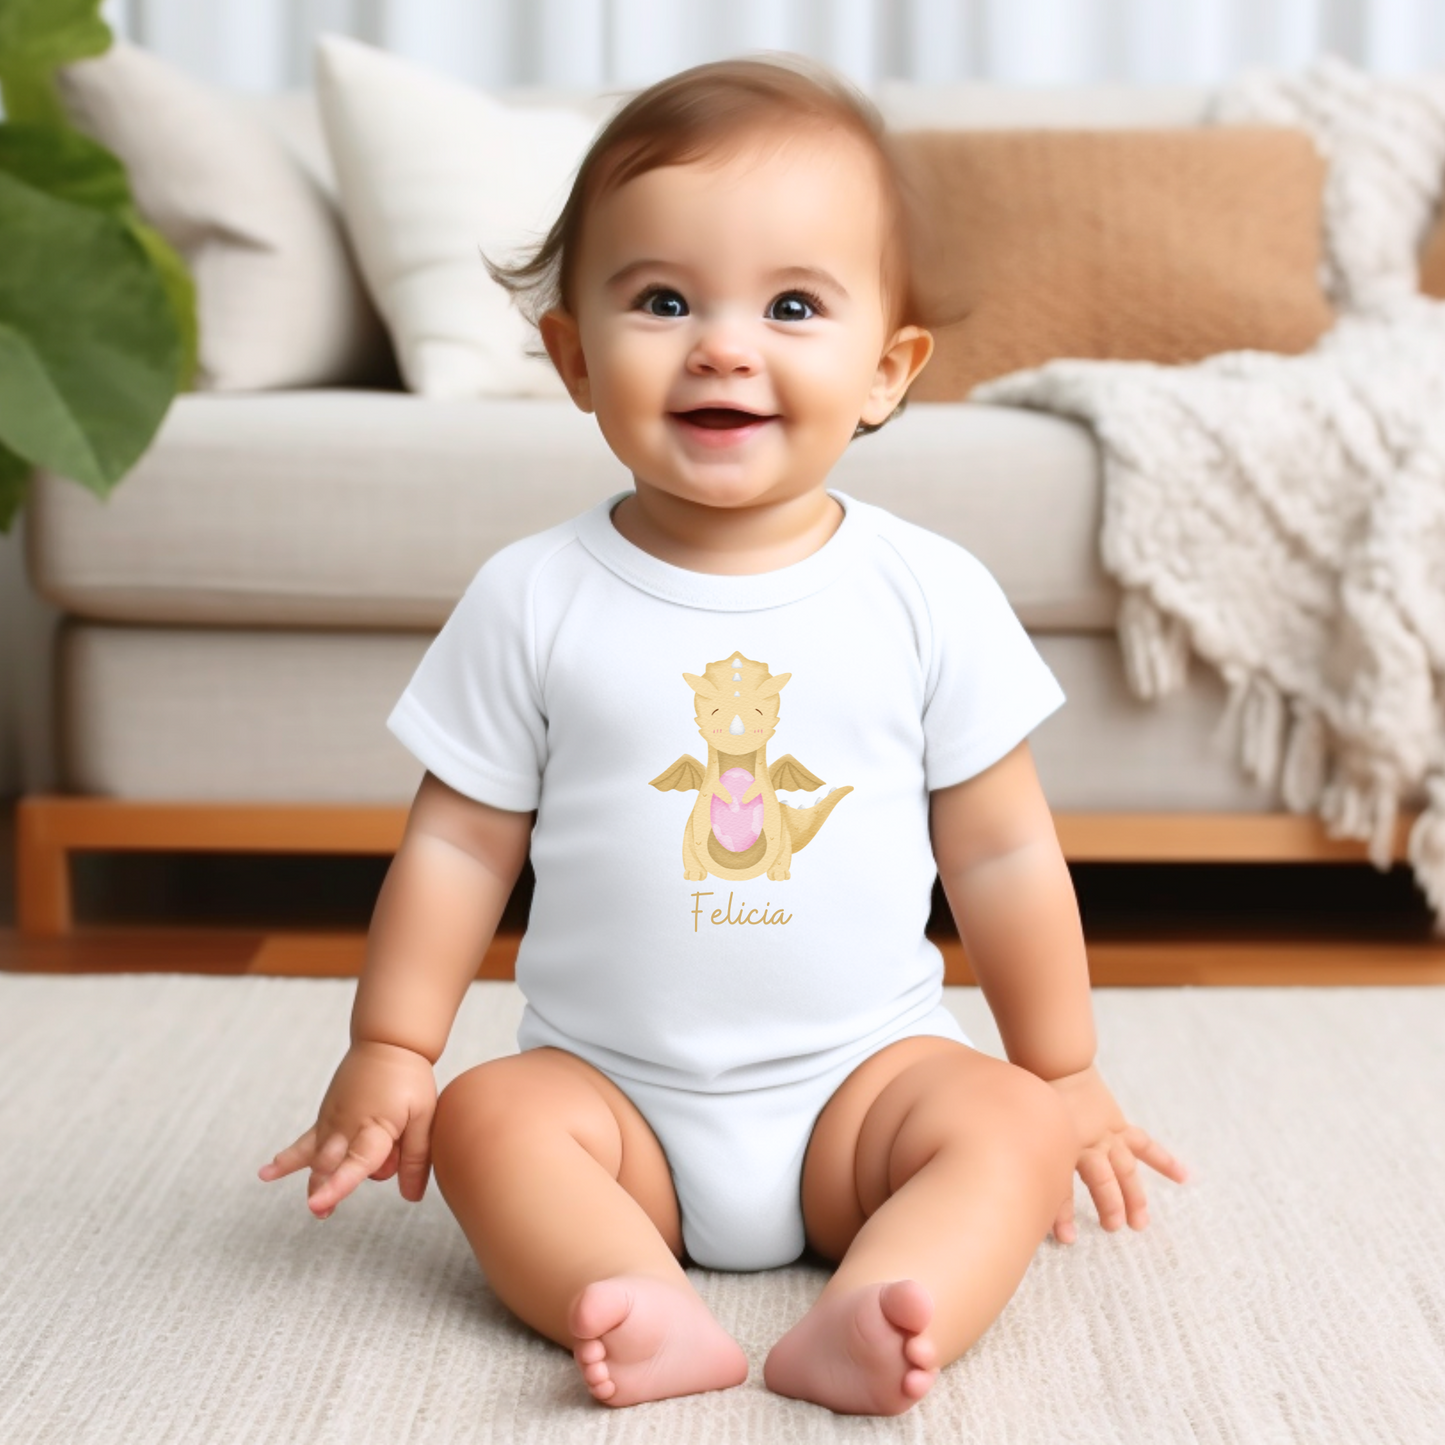 Personalized Onesie with Baby's Name